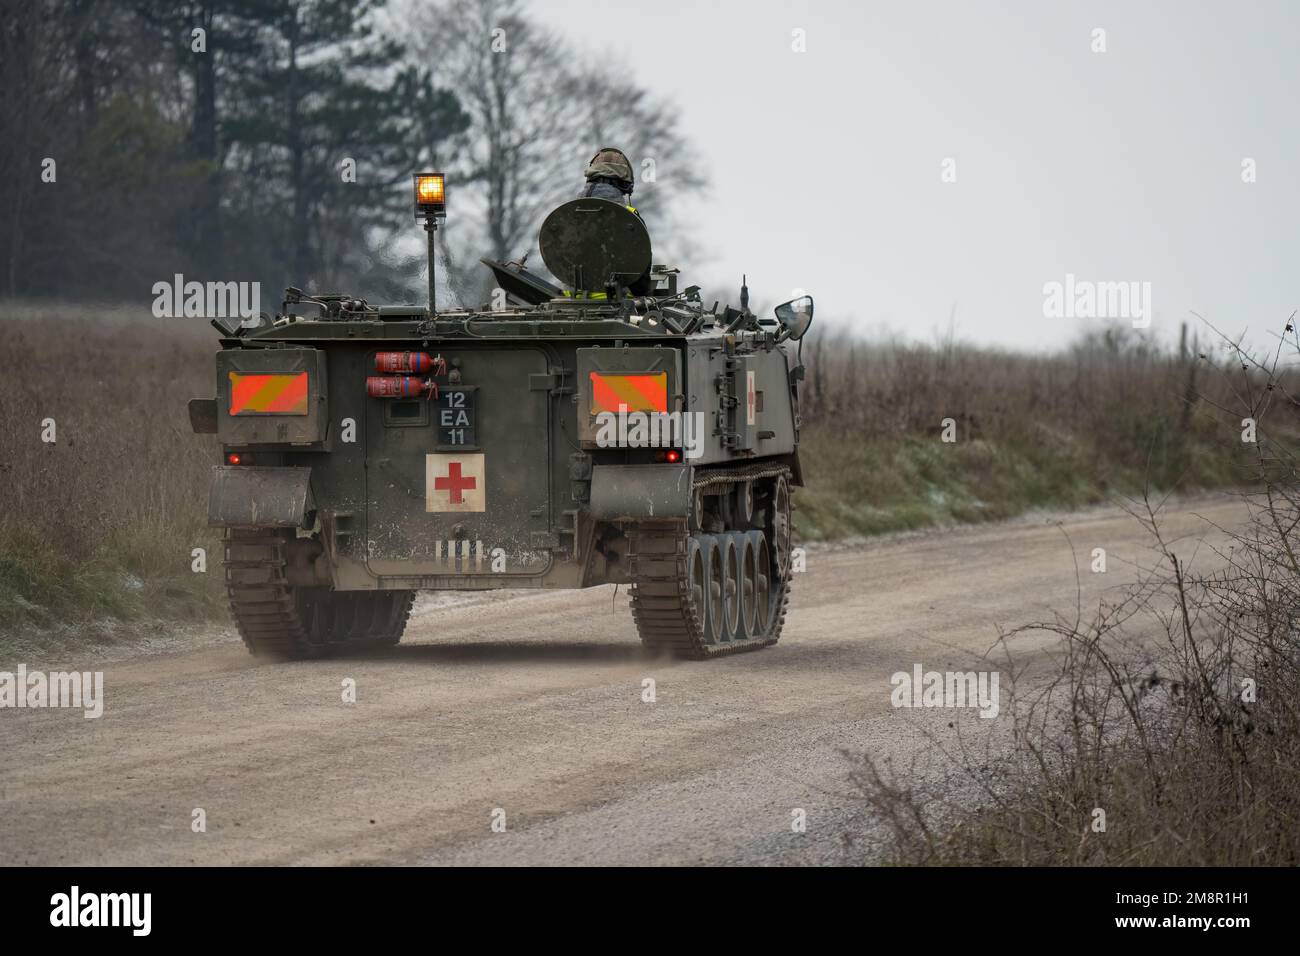 close-up of a British army Bulldog FV430 vehicle in action on a military combat exercise,Wiltshire UK Stock Photo